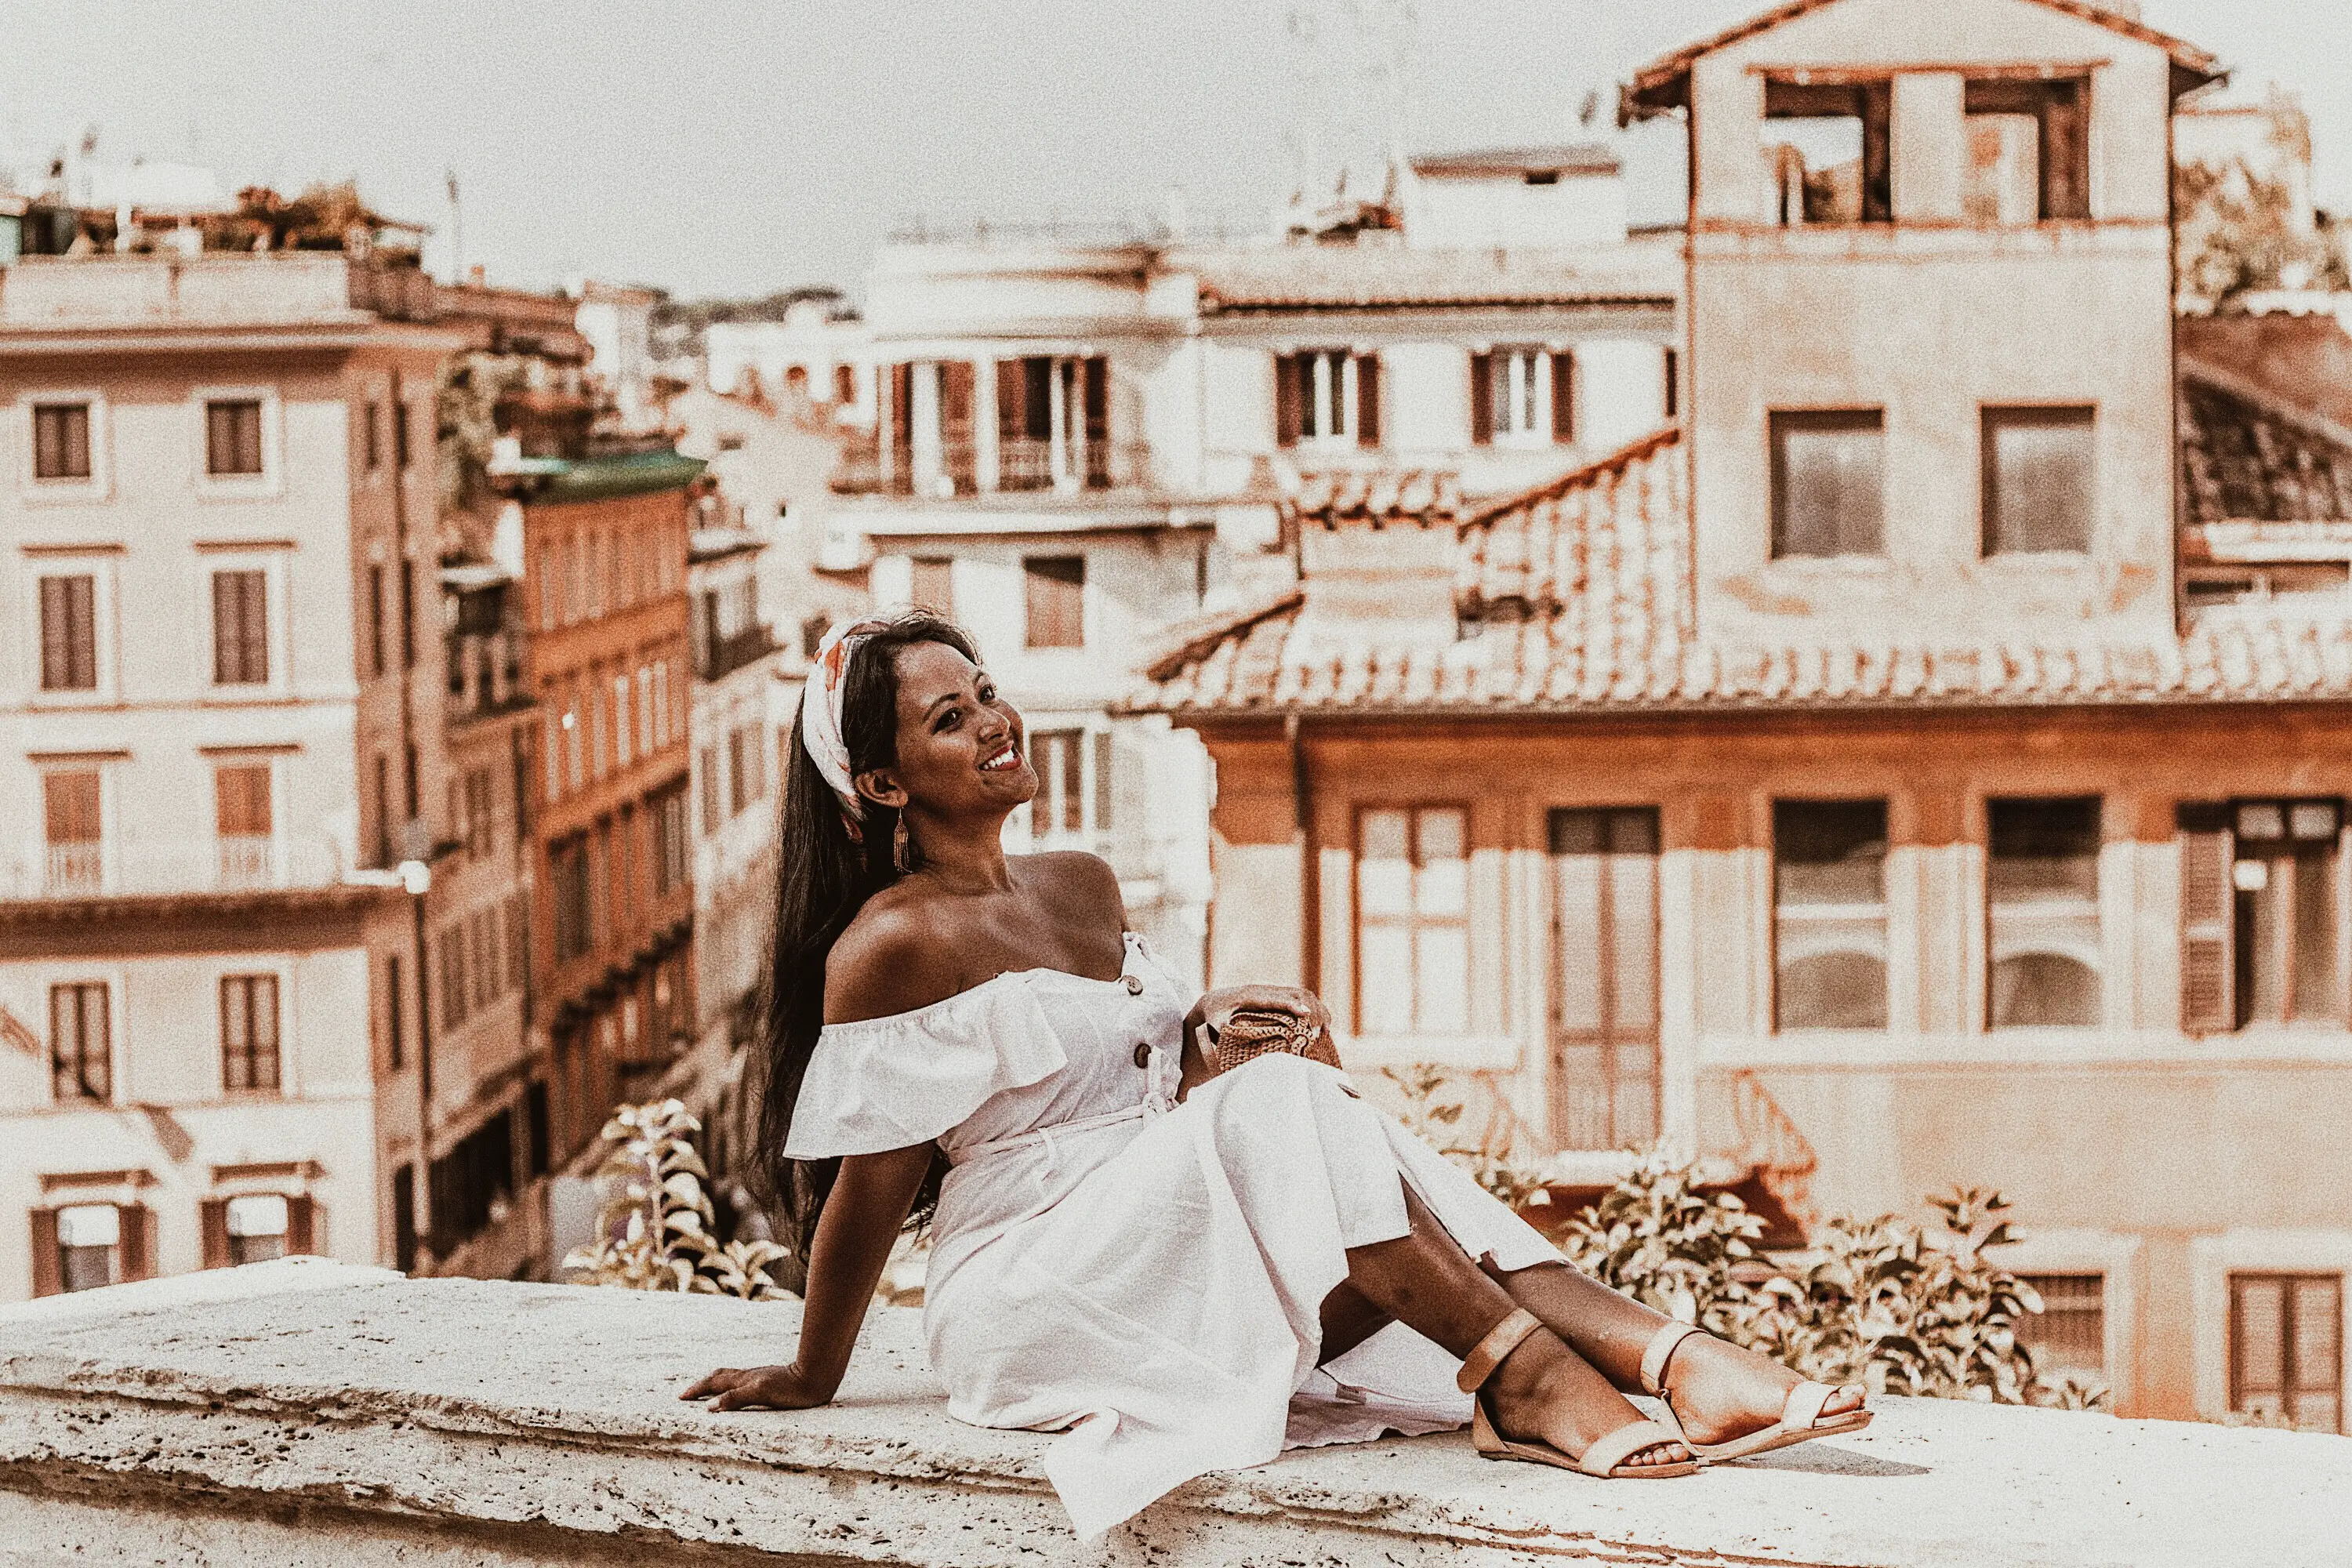 How-To-Wear-Off-Shoulder-Dress-Light-Blush-Pink-Button-Down-Dress-Rattan-Straw-Basket-Bag-Flat-Sandal-Headwrap-Paris-Chic-Style-Fashion-Lookbook-Street-Style-ootd Outfit Of The Day-Rome-Italy-3